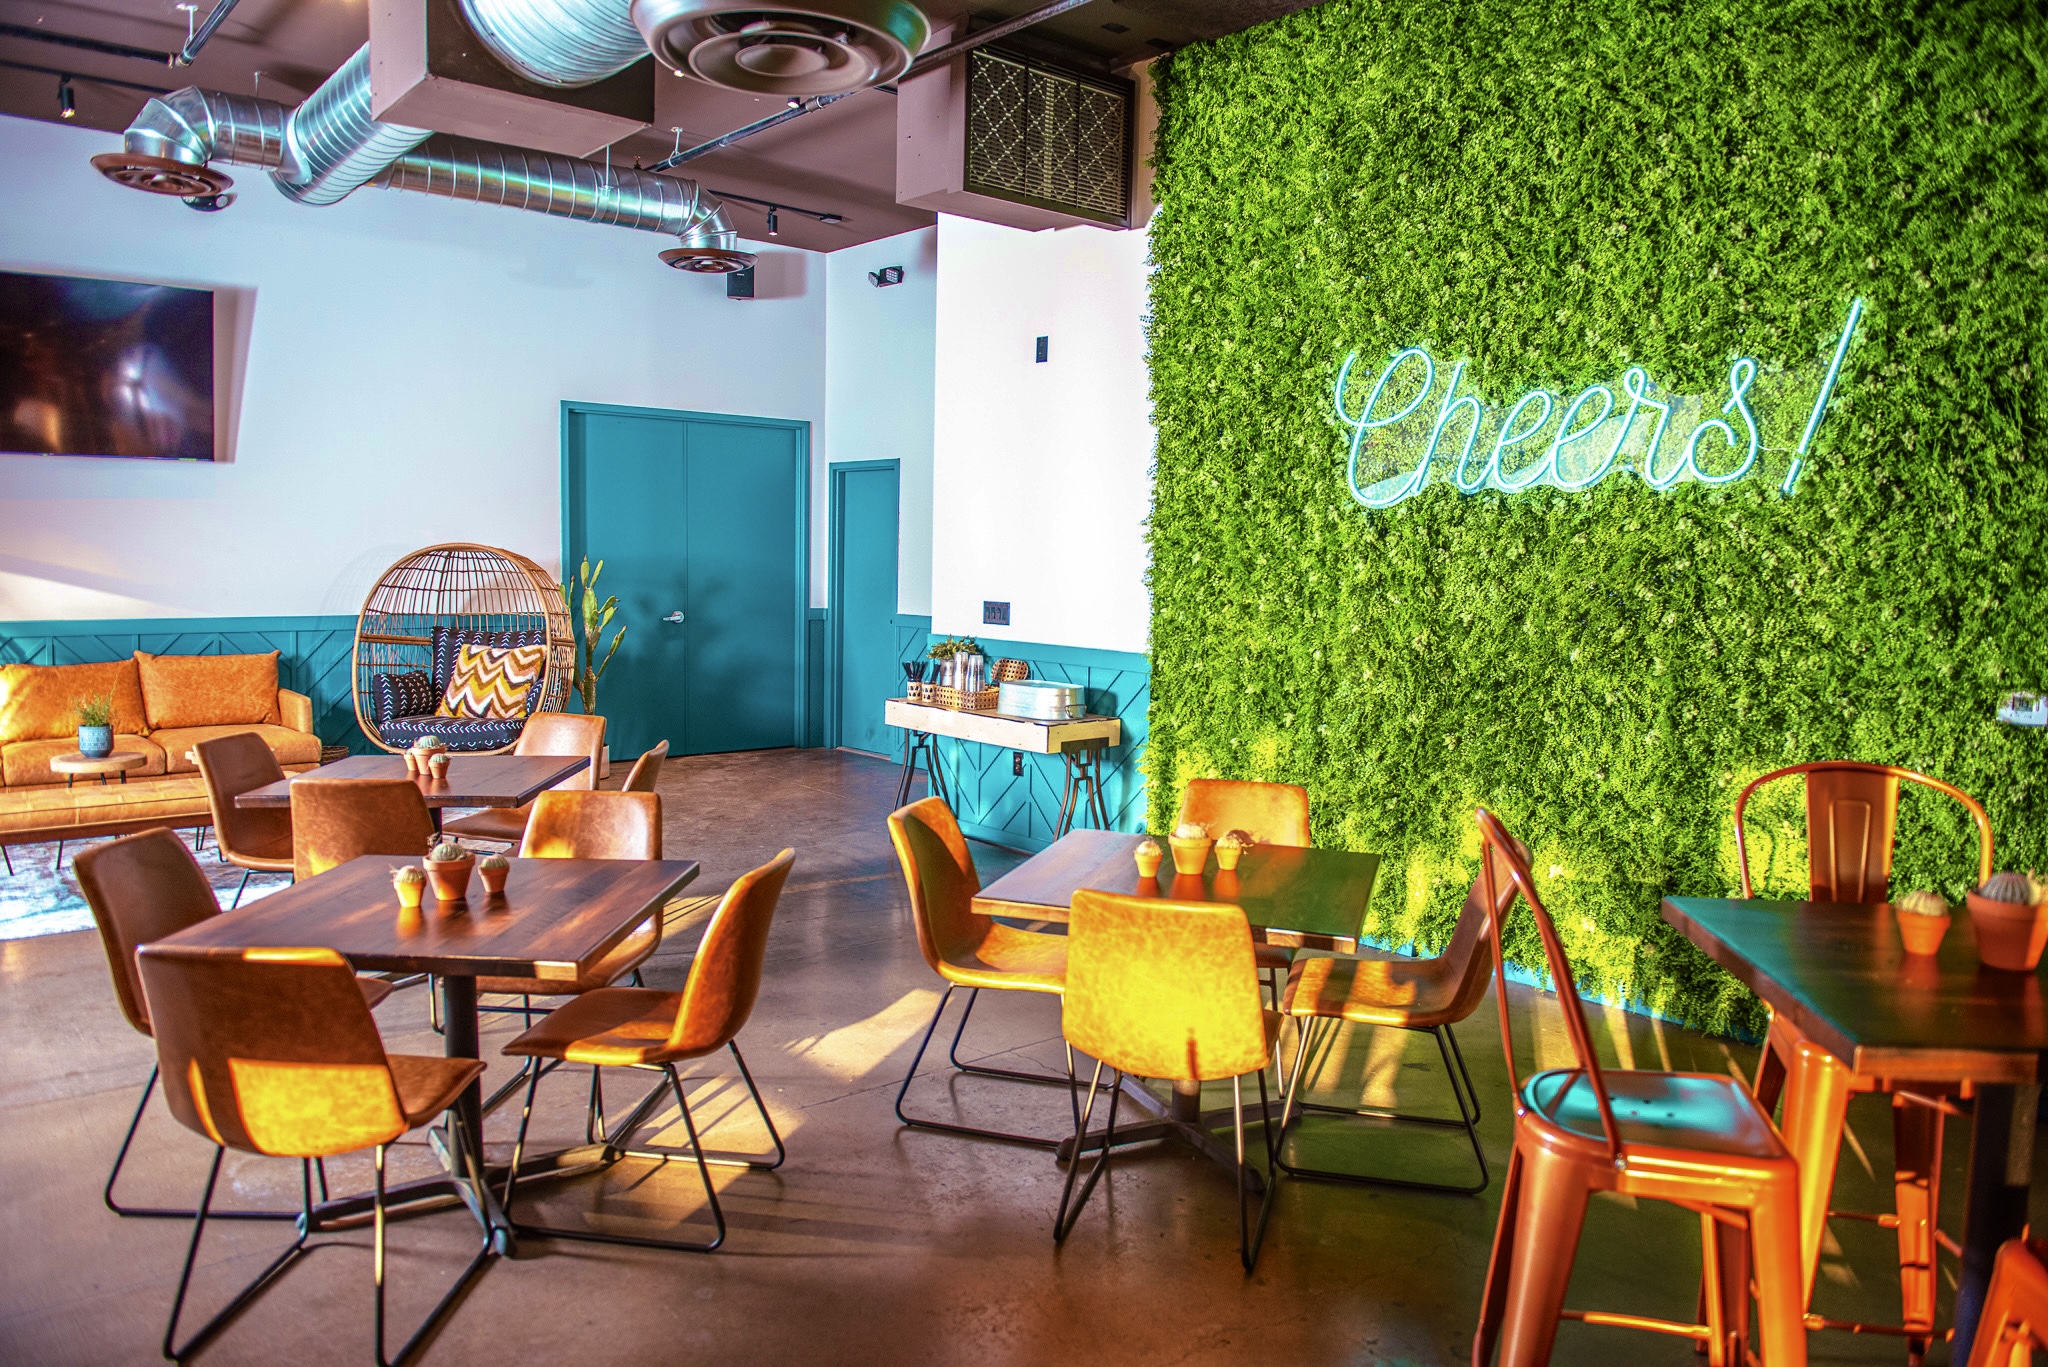 A restaurant with tables and chairs in front of a green wall.